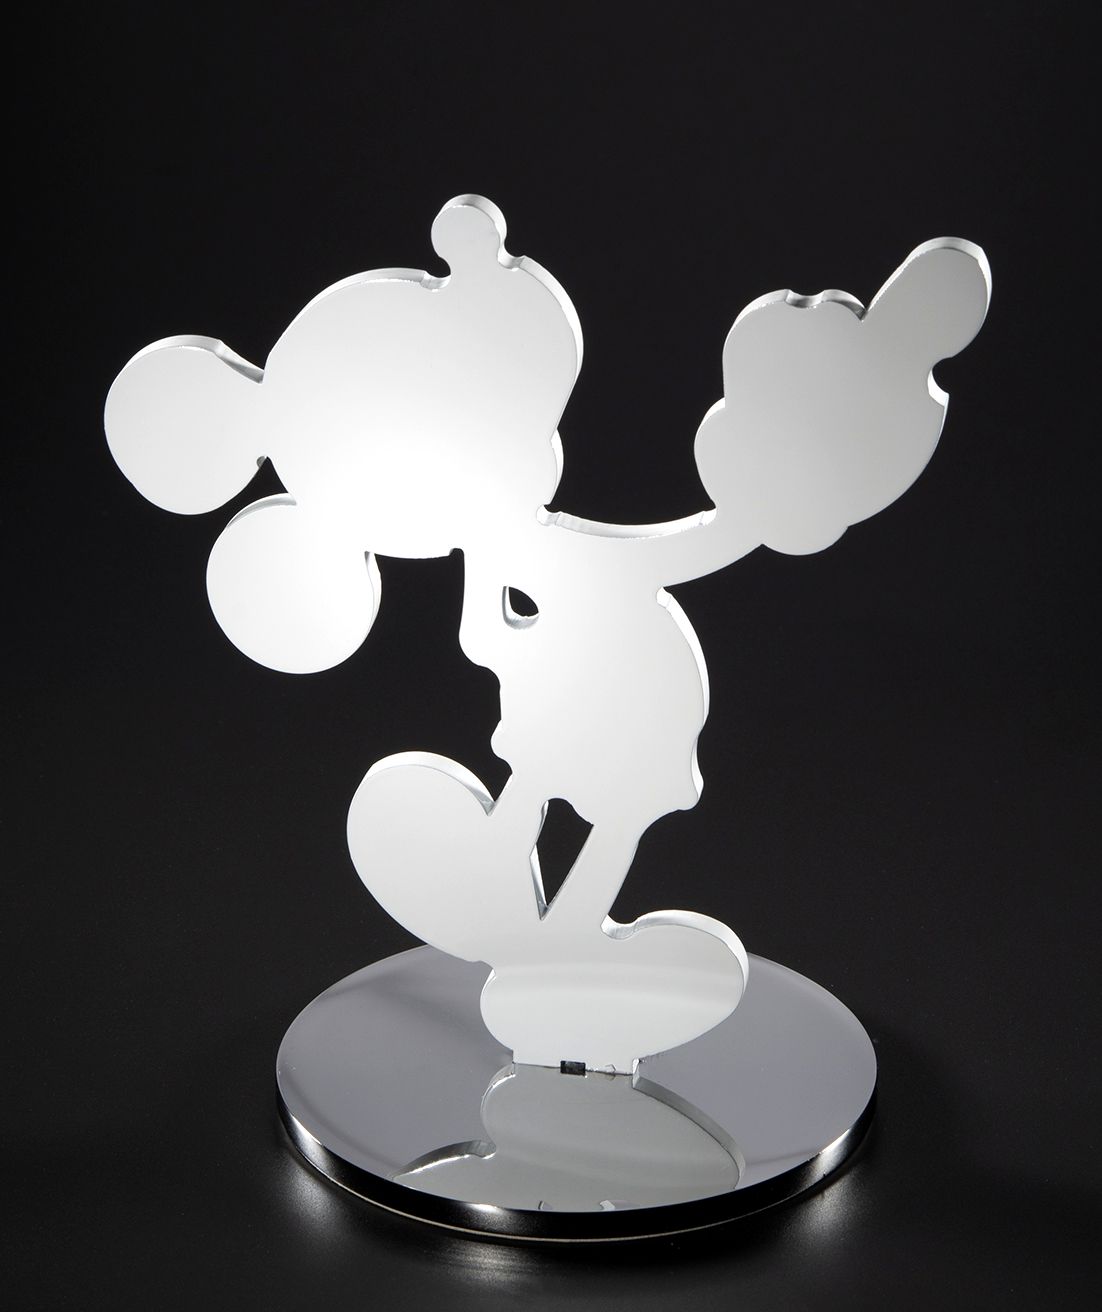 Thierry Corpet Thierry CORPET by Poulpik Studio

Mouse Finger White

Silhouette"&hellip;